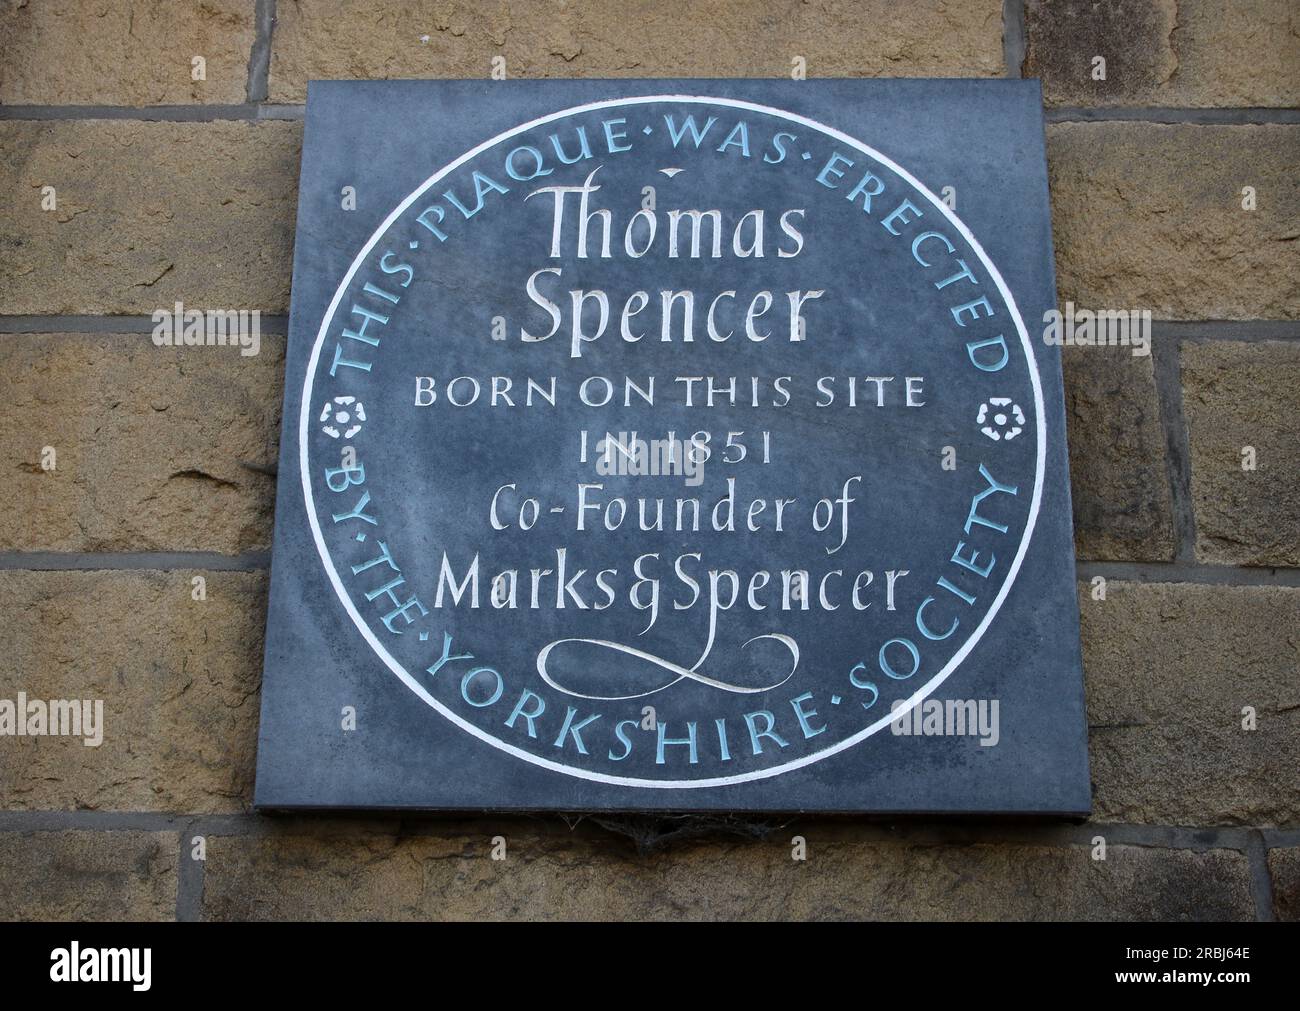 Plaque erected by Yorkshire Society to mark birth place of Thomas Spencer, Co-Founder of Marks and Spencer. Plaque on wall Newmarket Street Skipton. Stock Photo